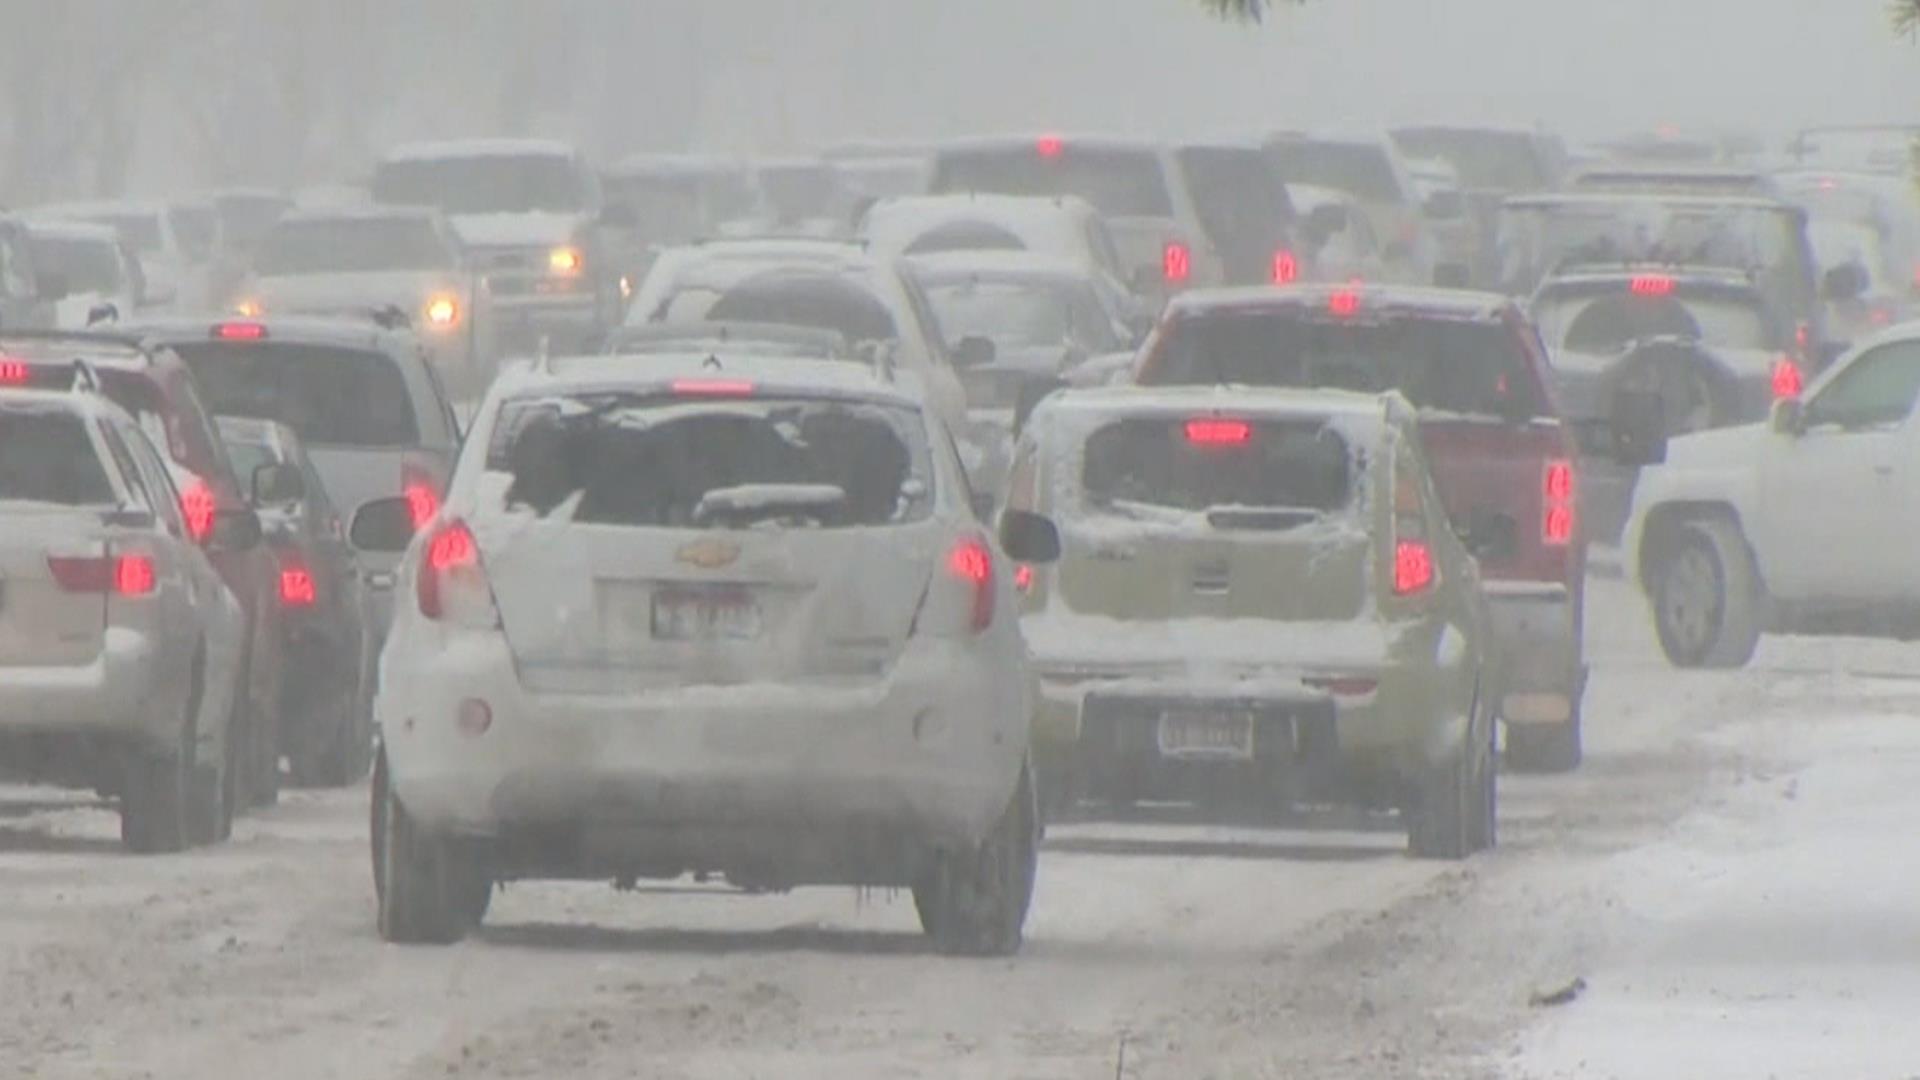 Winter Weather Woes Give Millions Holiday Headaches